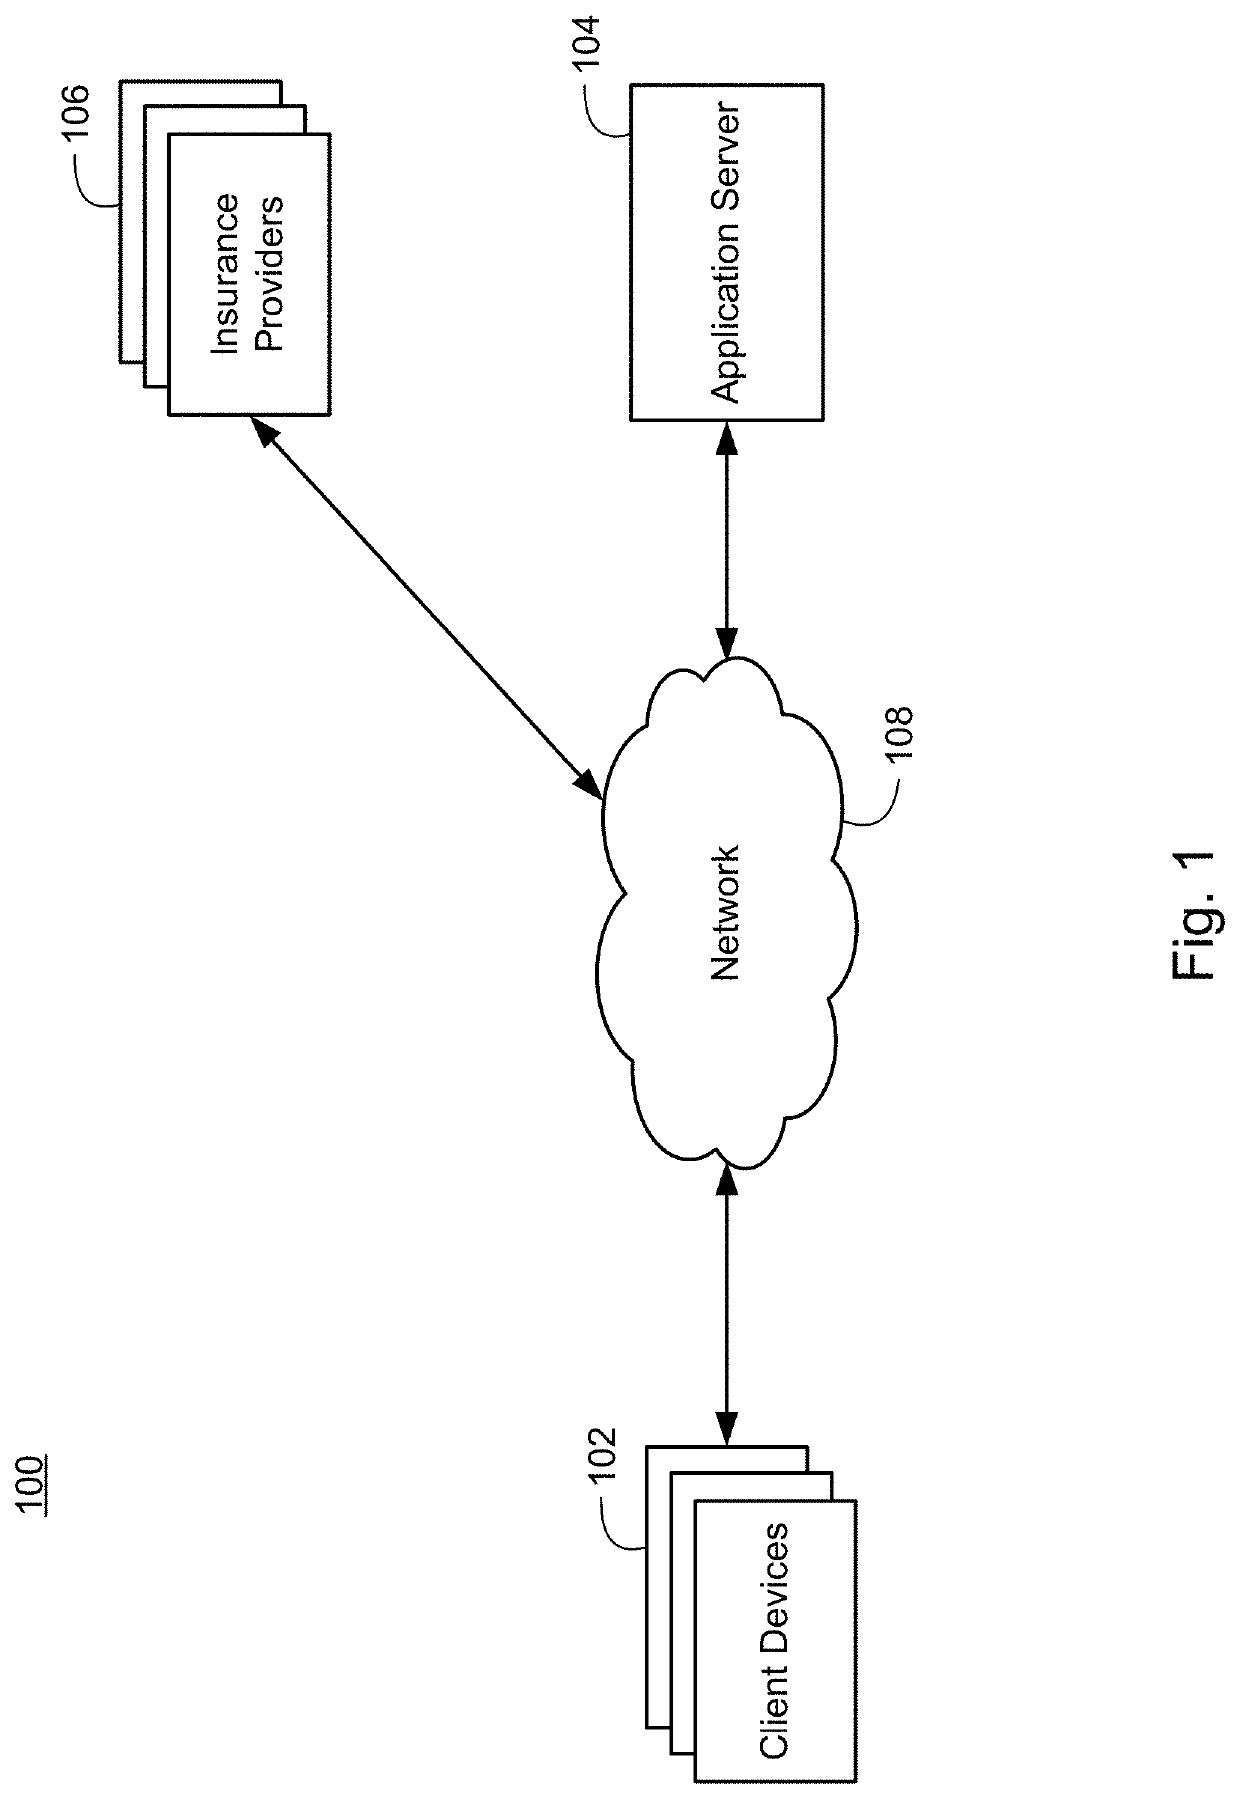 Mobile application and system for connecting users to carriers to facilitate availability of short-term, on-demand insurance